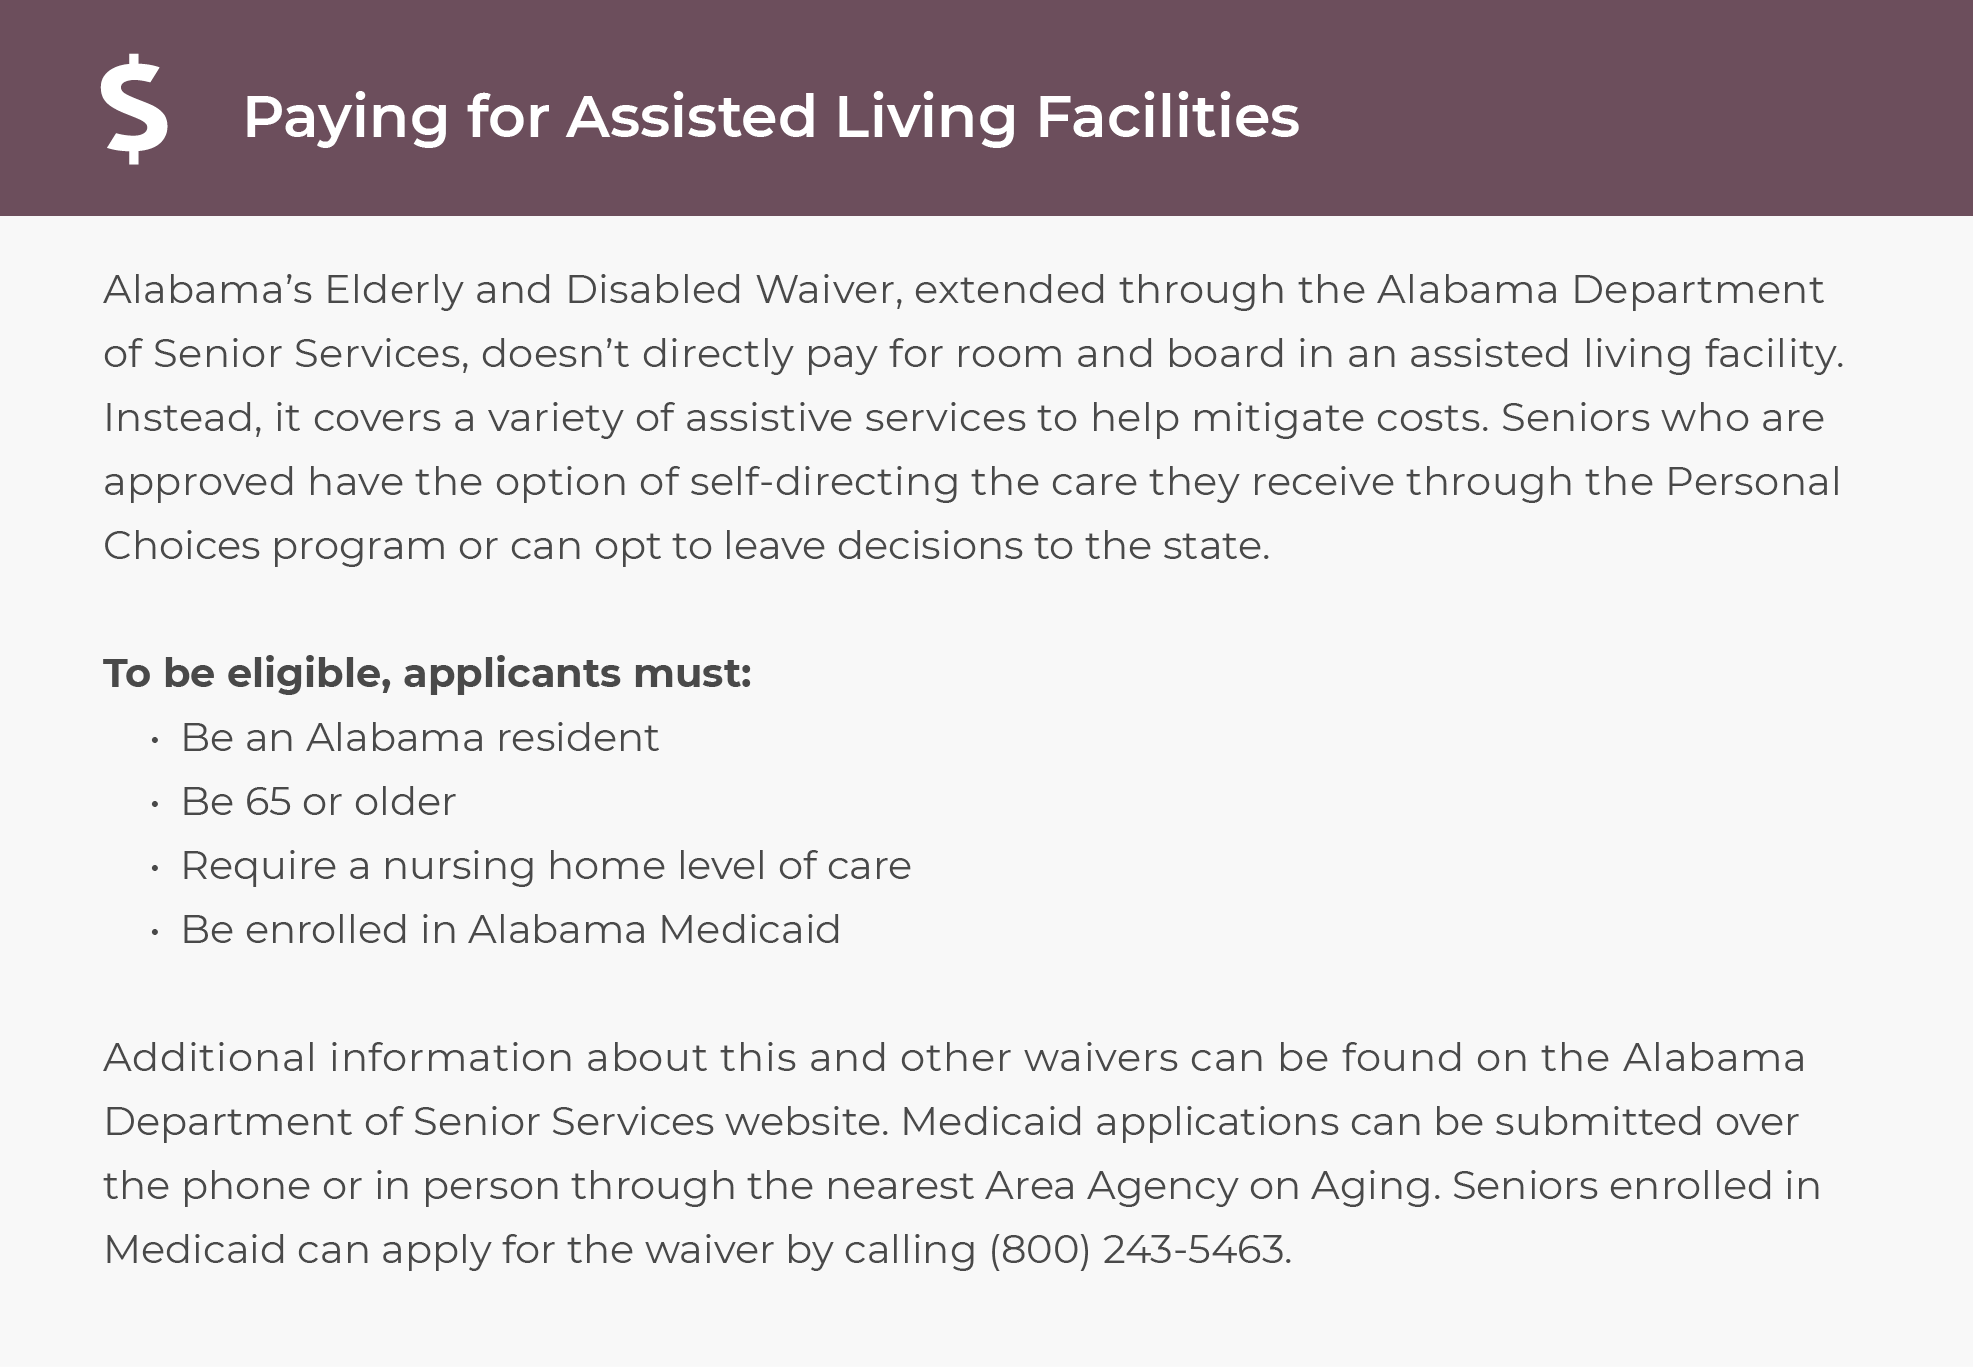 Paying for Assisted Living in Alabama